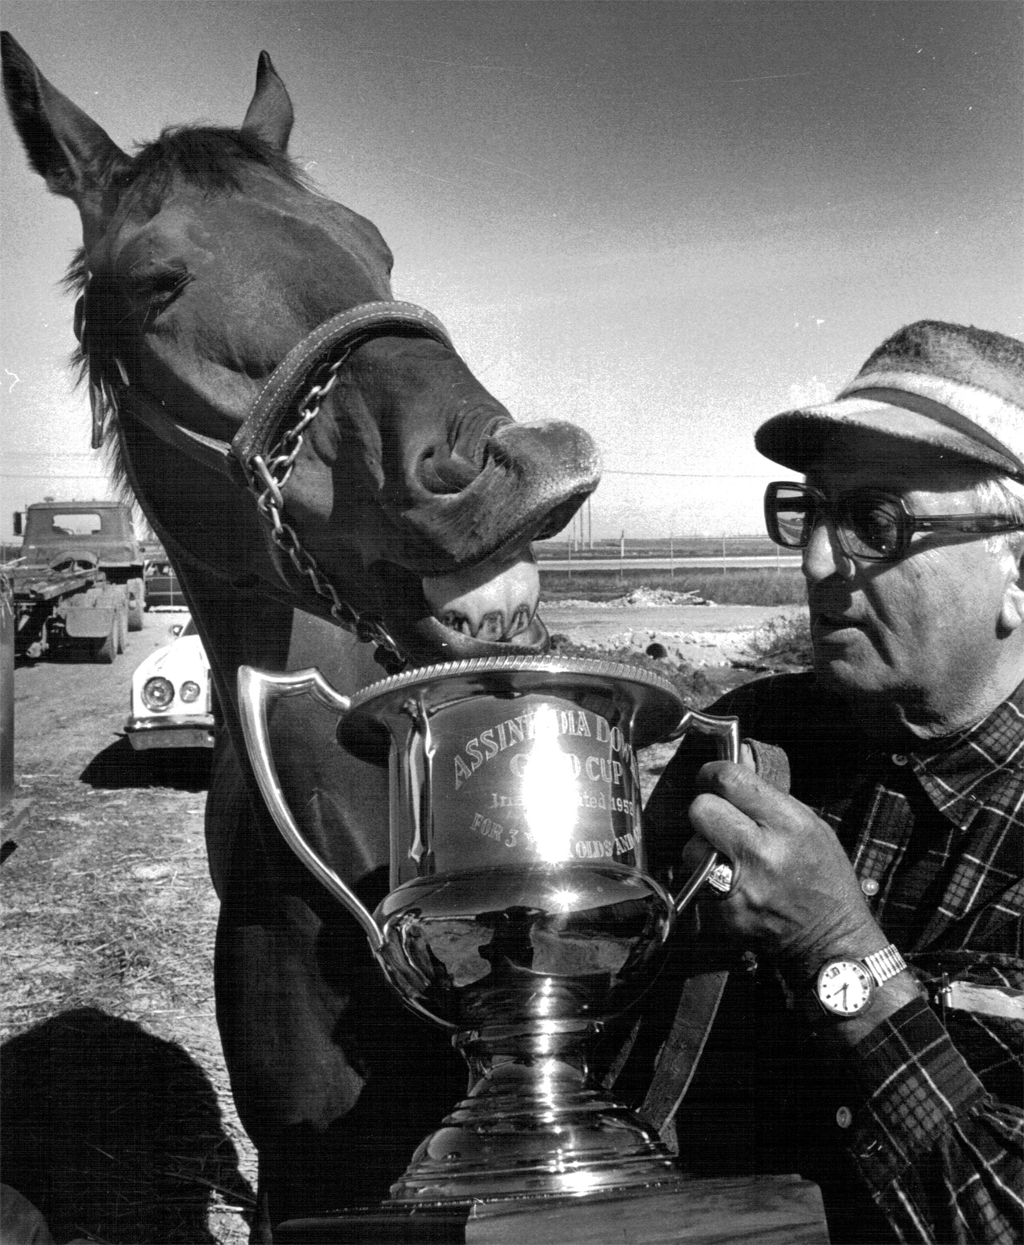 Nick Block with Gold Cup winner Scarlet Rich in 1979.